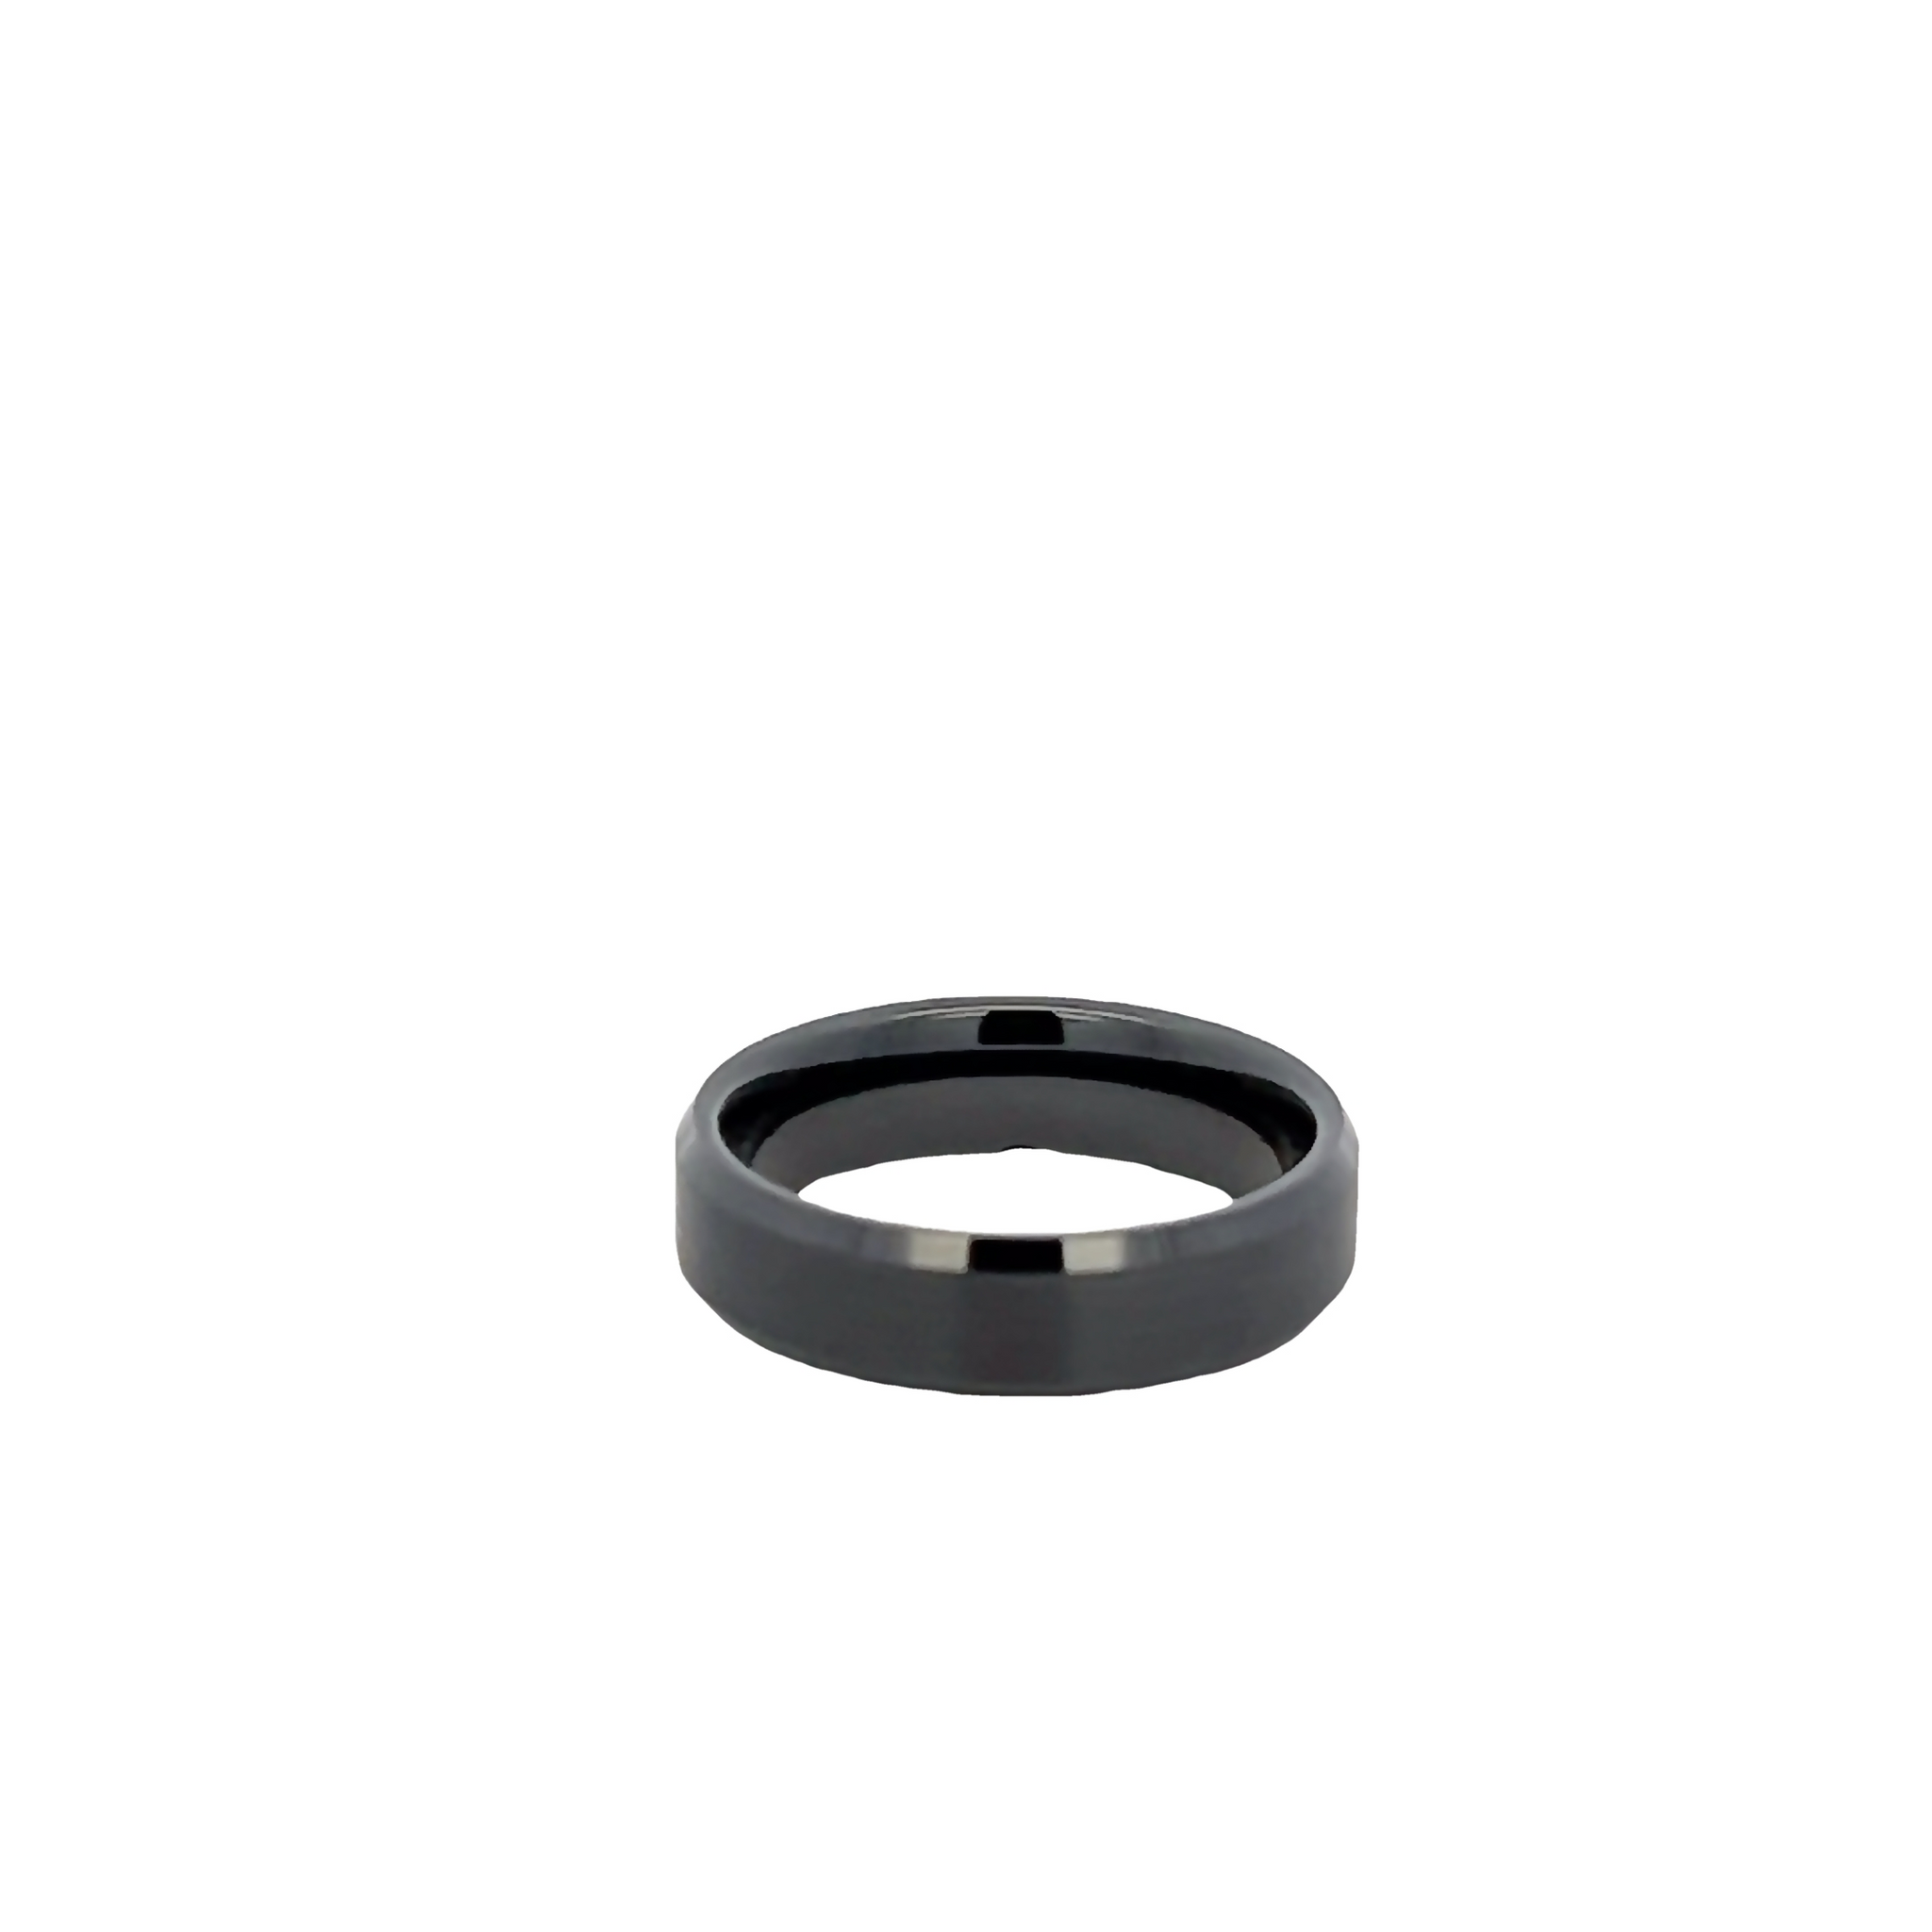 6mm Black Ceramic Wedding Band With A Beveled Edge And Satin Center.. Size 10